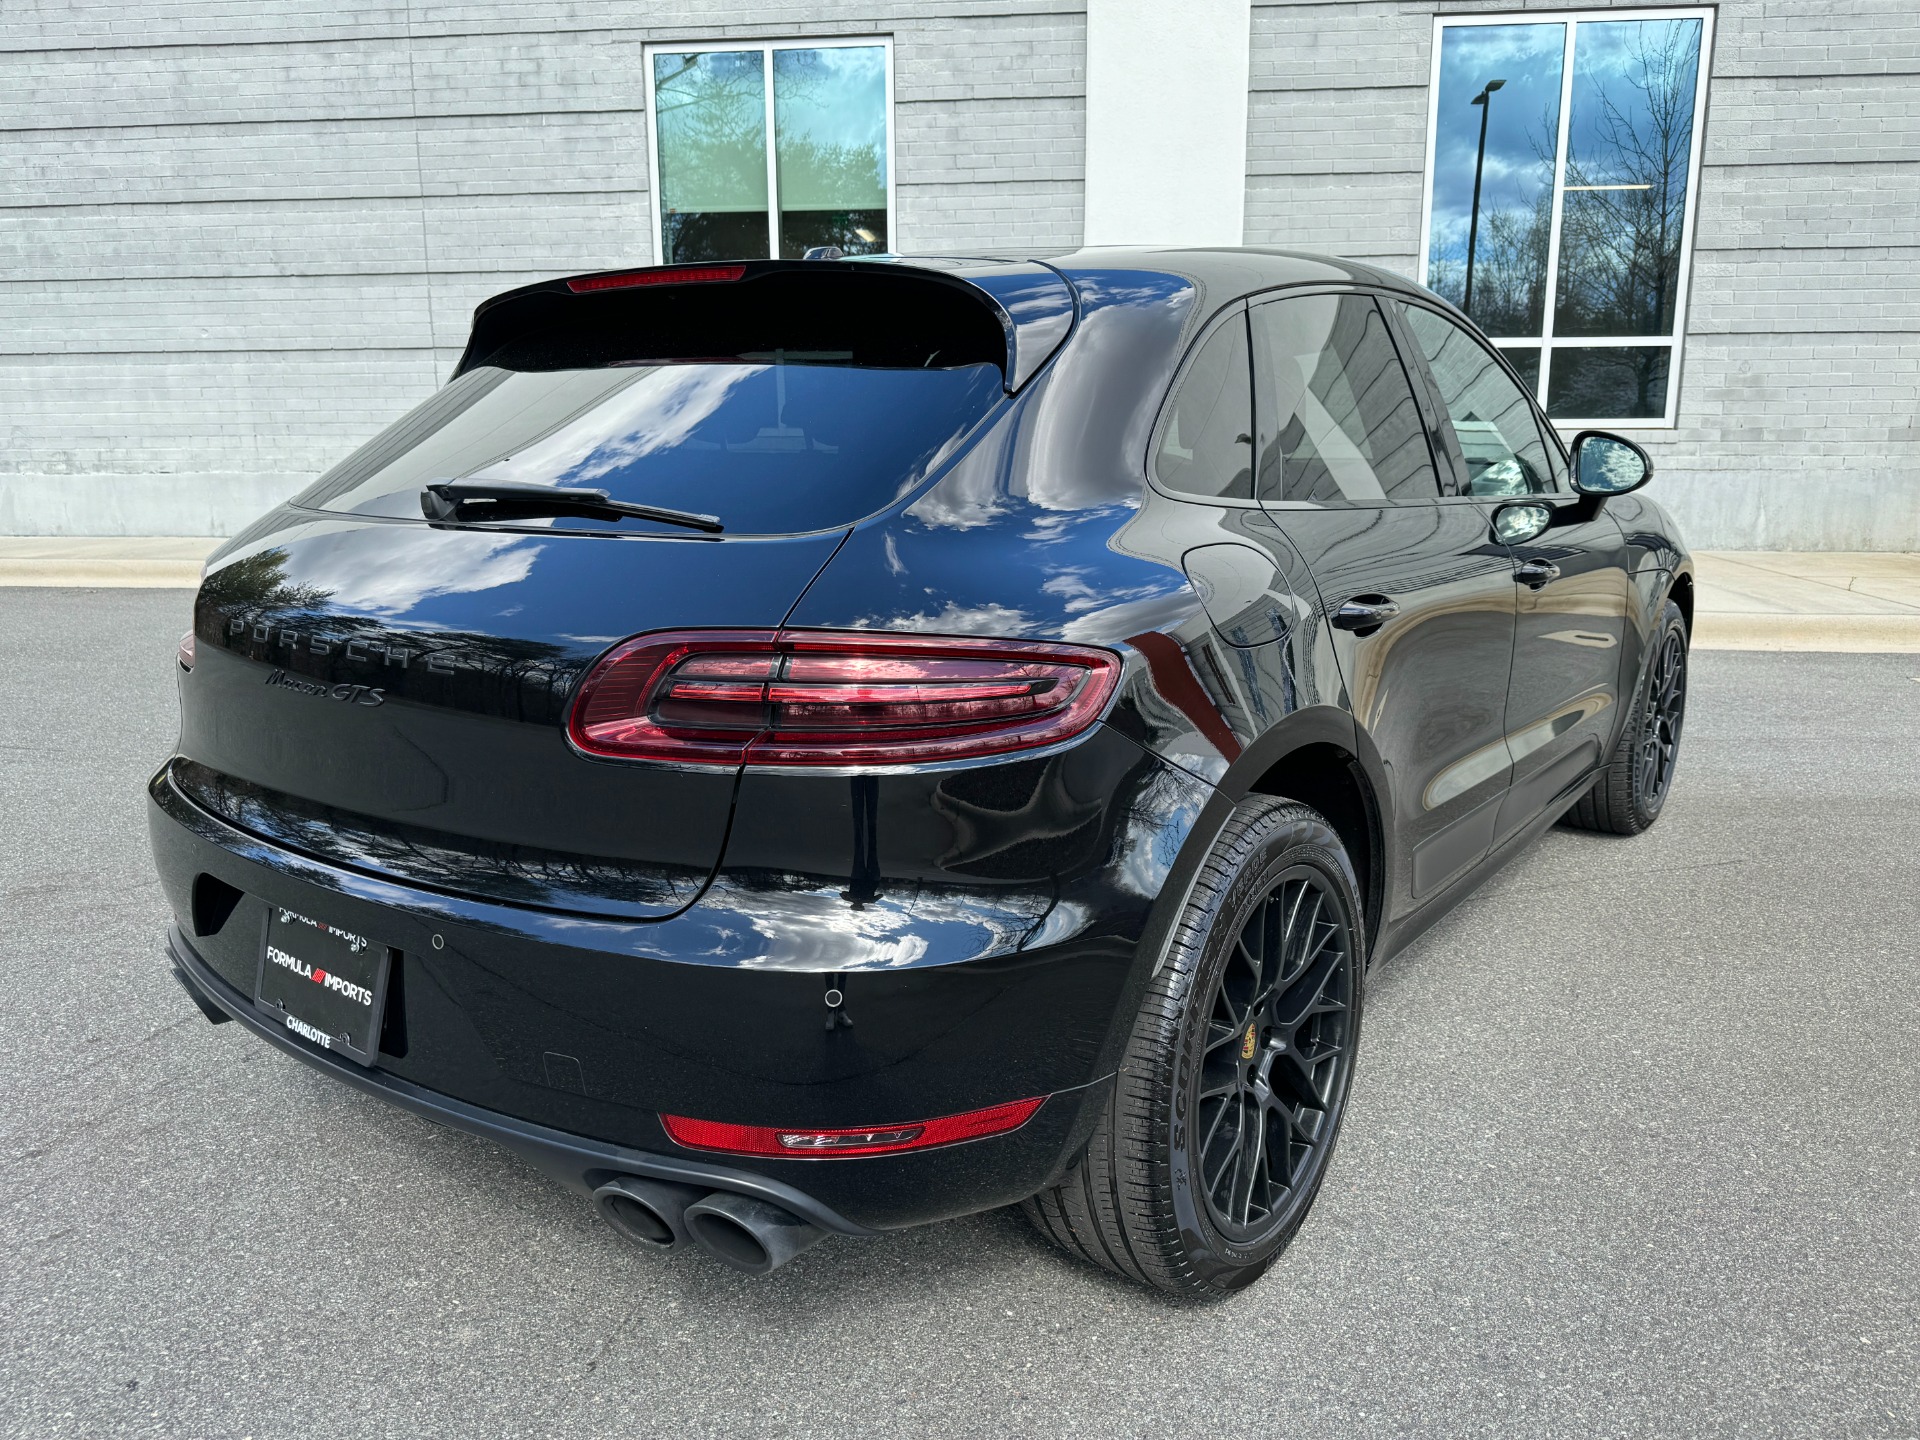 Used 2018 Porsche Macan GTS / 20IN WHEELS / PREMIUM PLUS / BOSE / SPORT SEATS for sale $53,995 at Formula Imports in Charlotte NC 28227 11